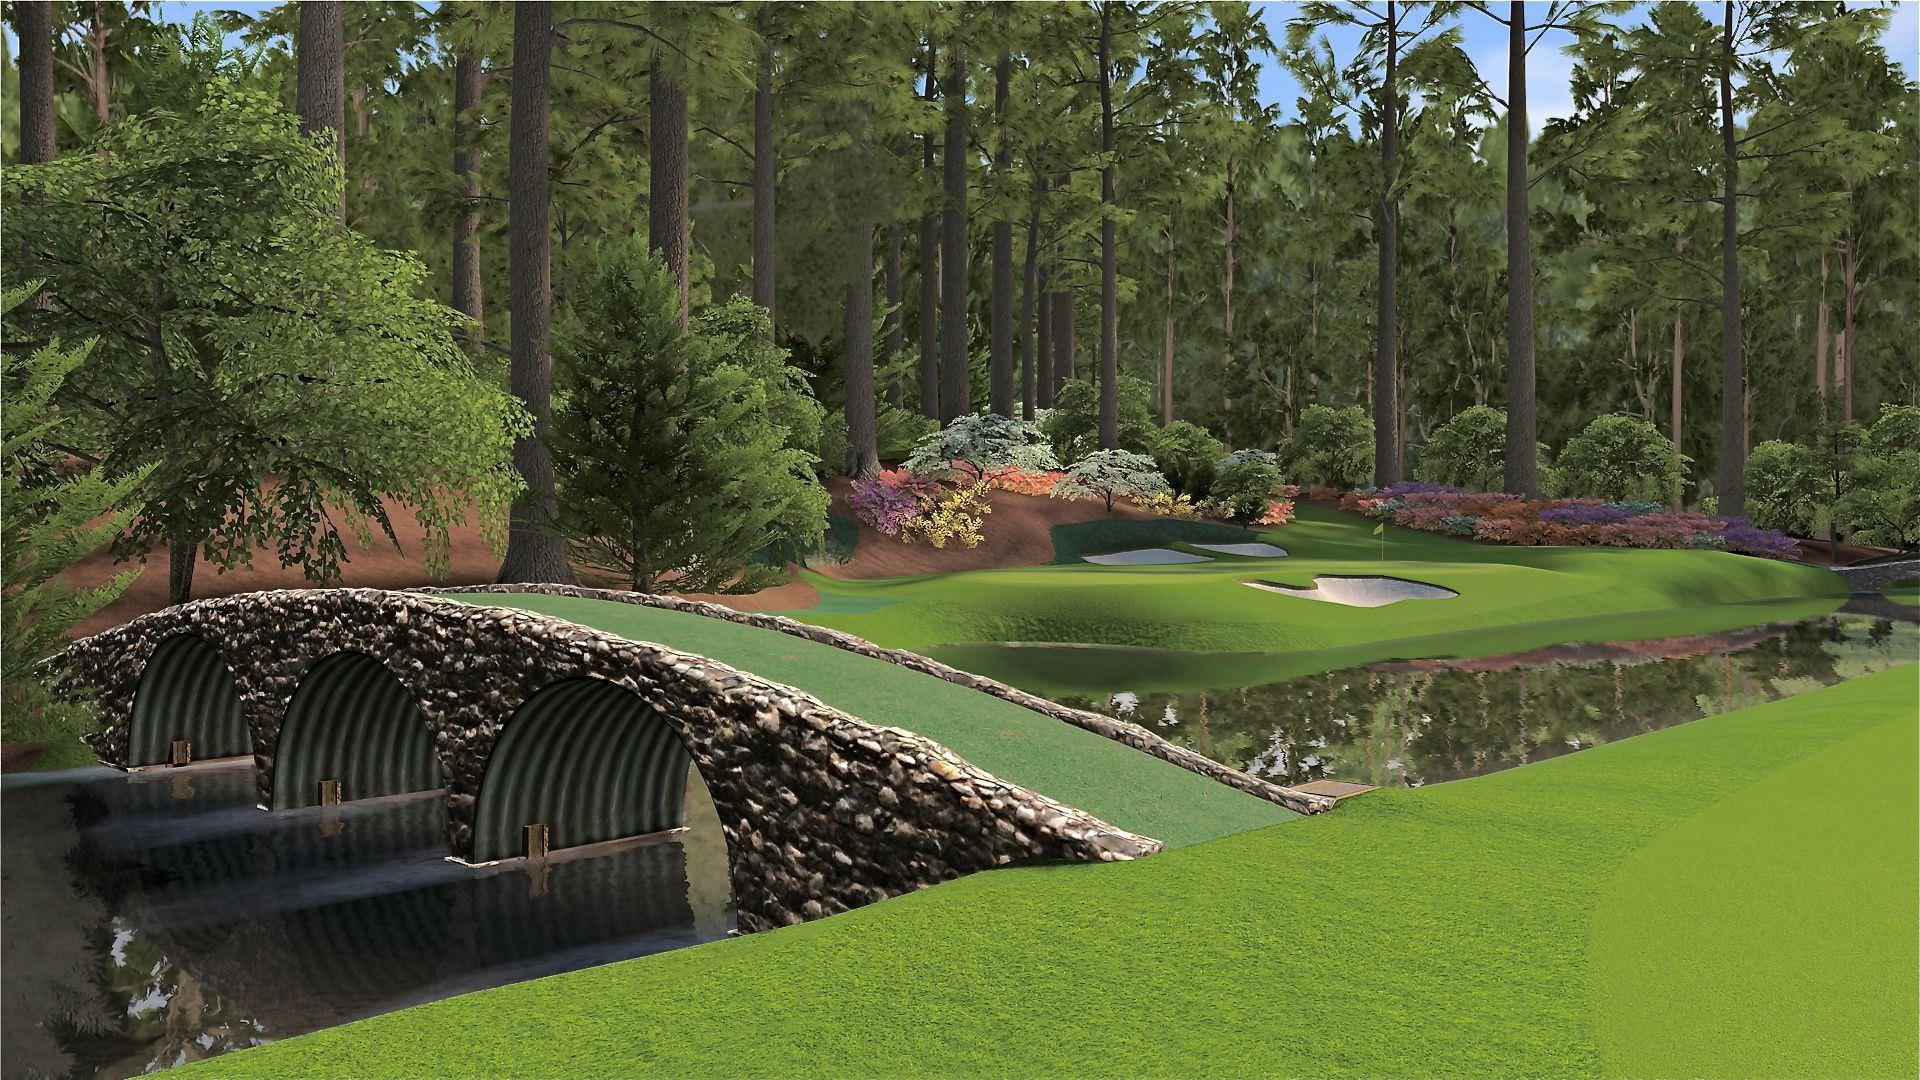 Free 2015 Wallpaper Of Augusta National